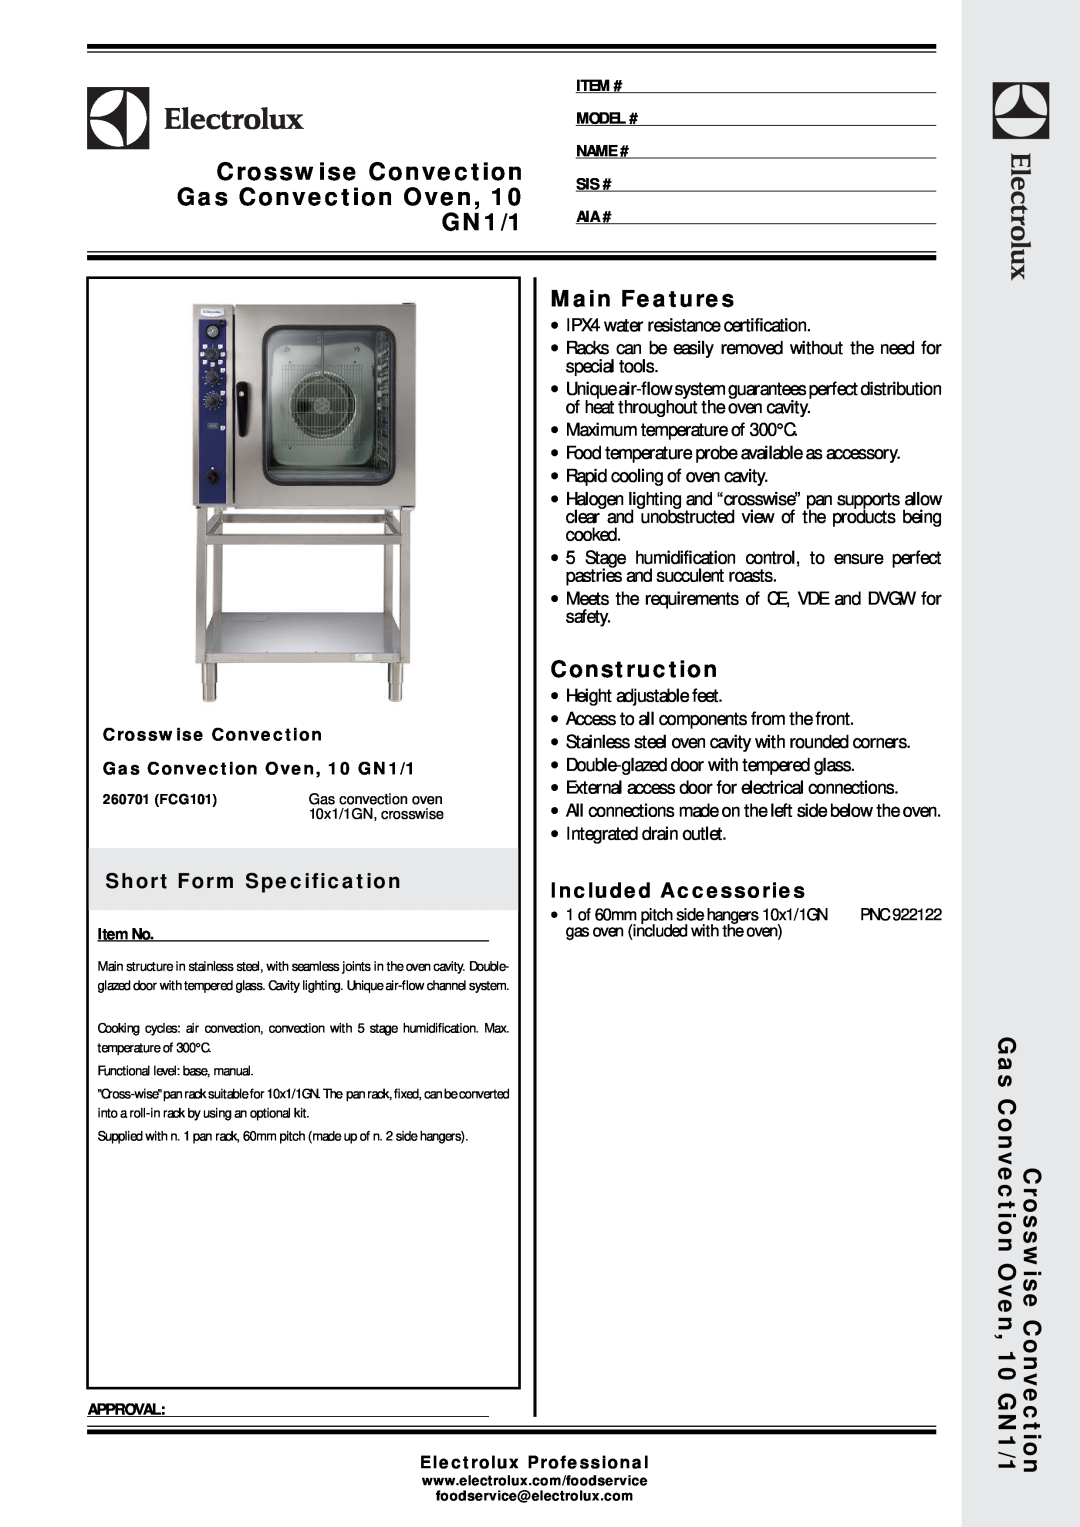 Electrolux 260701 (FCG101) manual Crosswise Convection, Gas Convection Oven, GN1/1, Main Features, Construction 